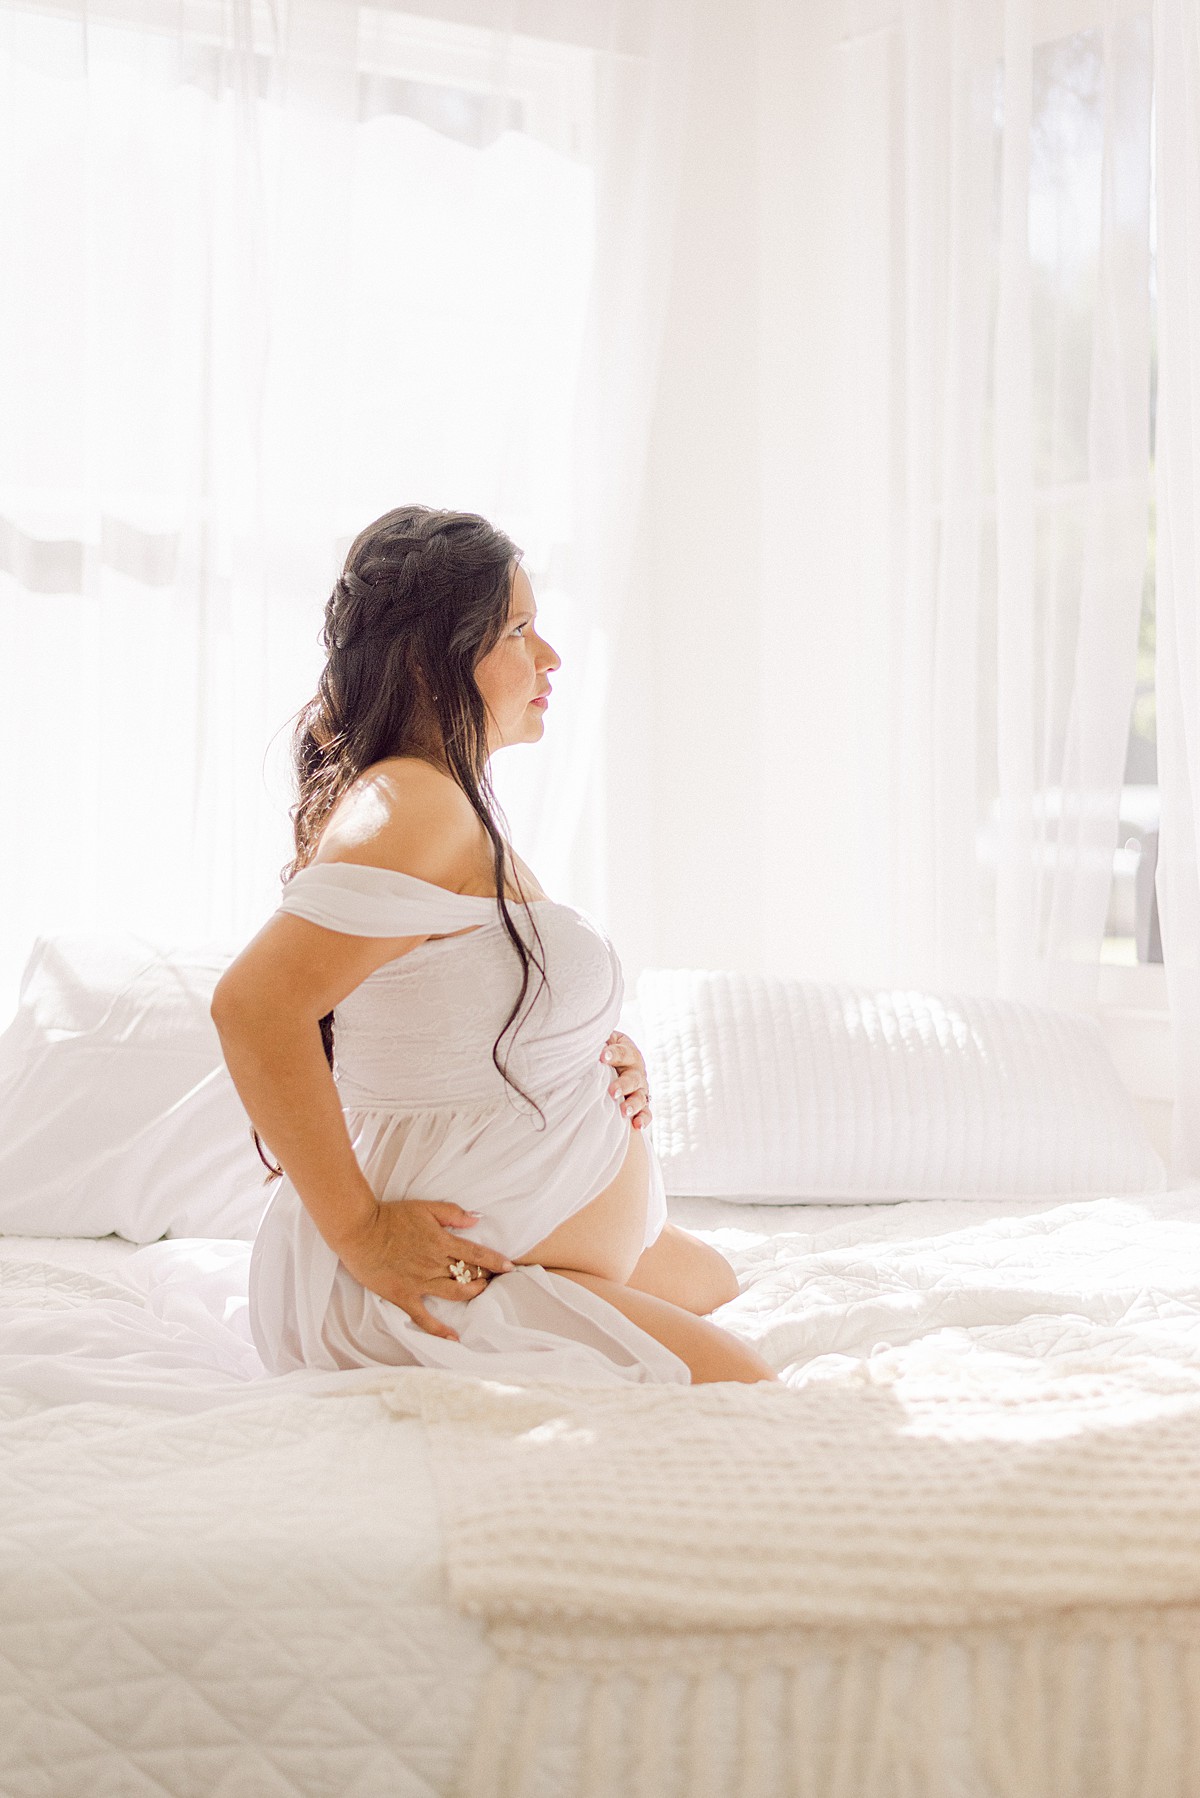 Side profile of expecting mom in white dress with exposed baby bell. She is kneeling on a white bed holding her baby bump.